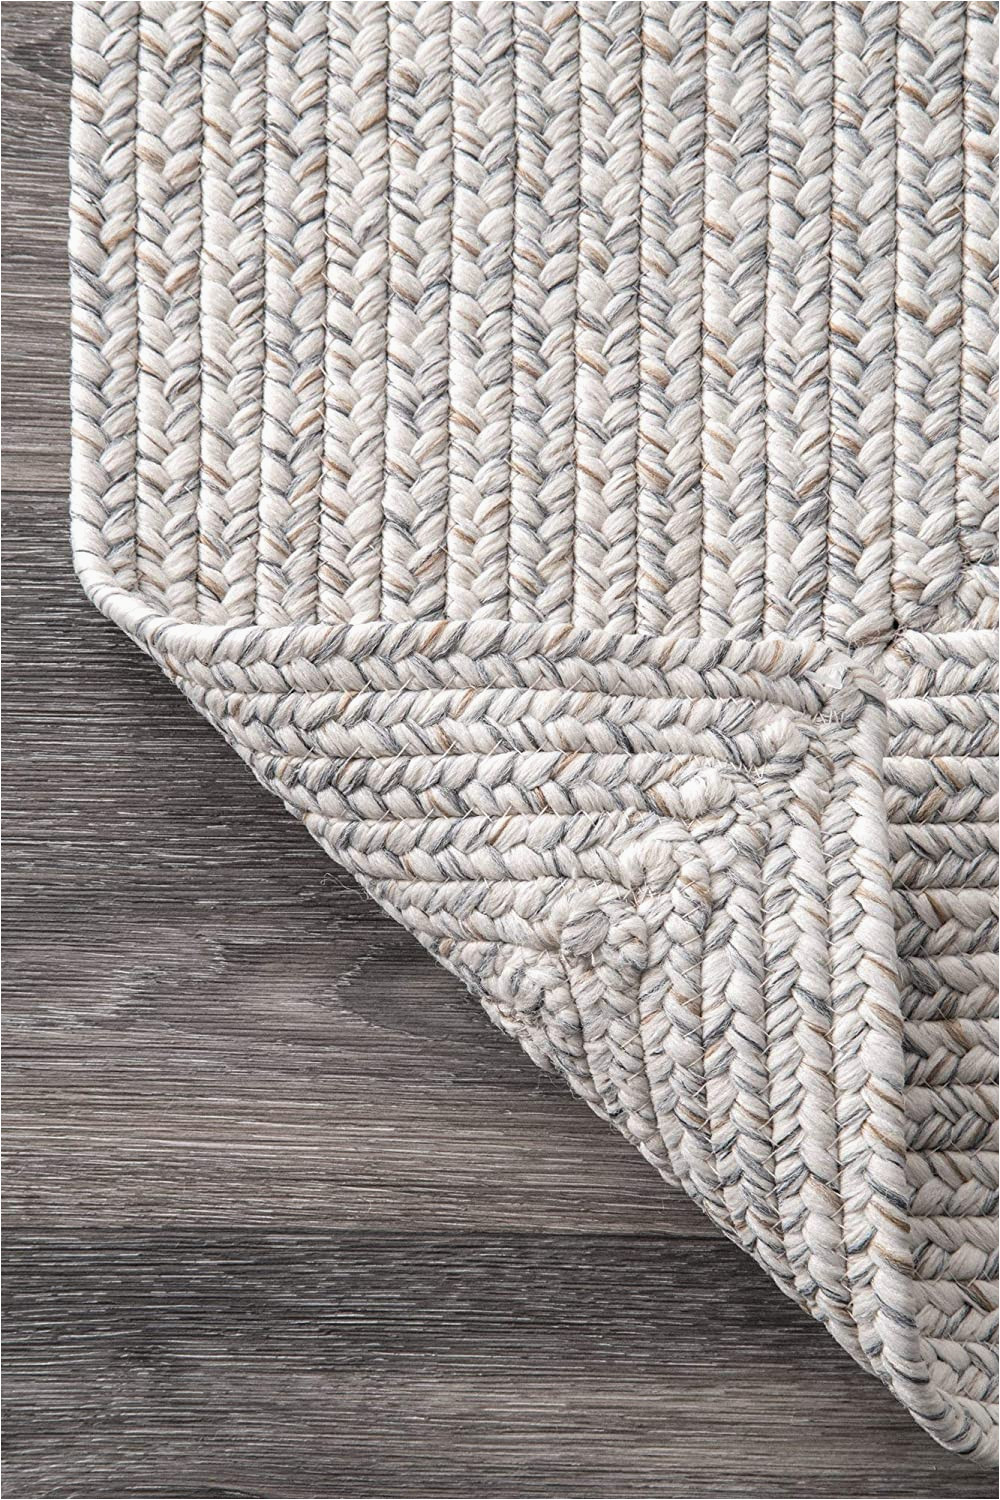 Moser Hand Braided Ivory Indoor Outdoor area Rug Braided Handmade Ivory Indoor/outdoor soft area Rug